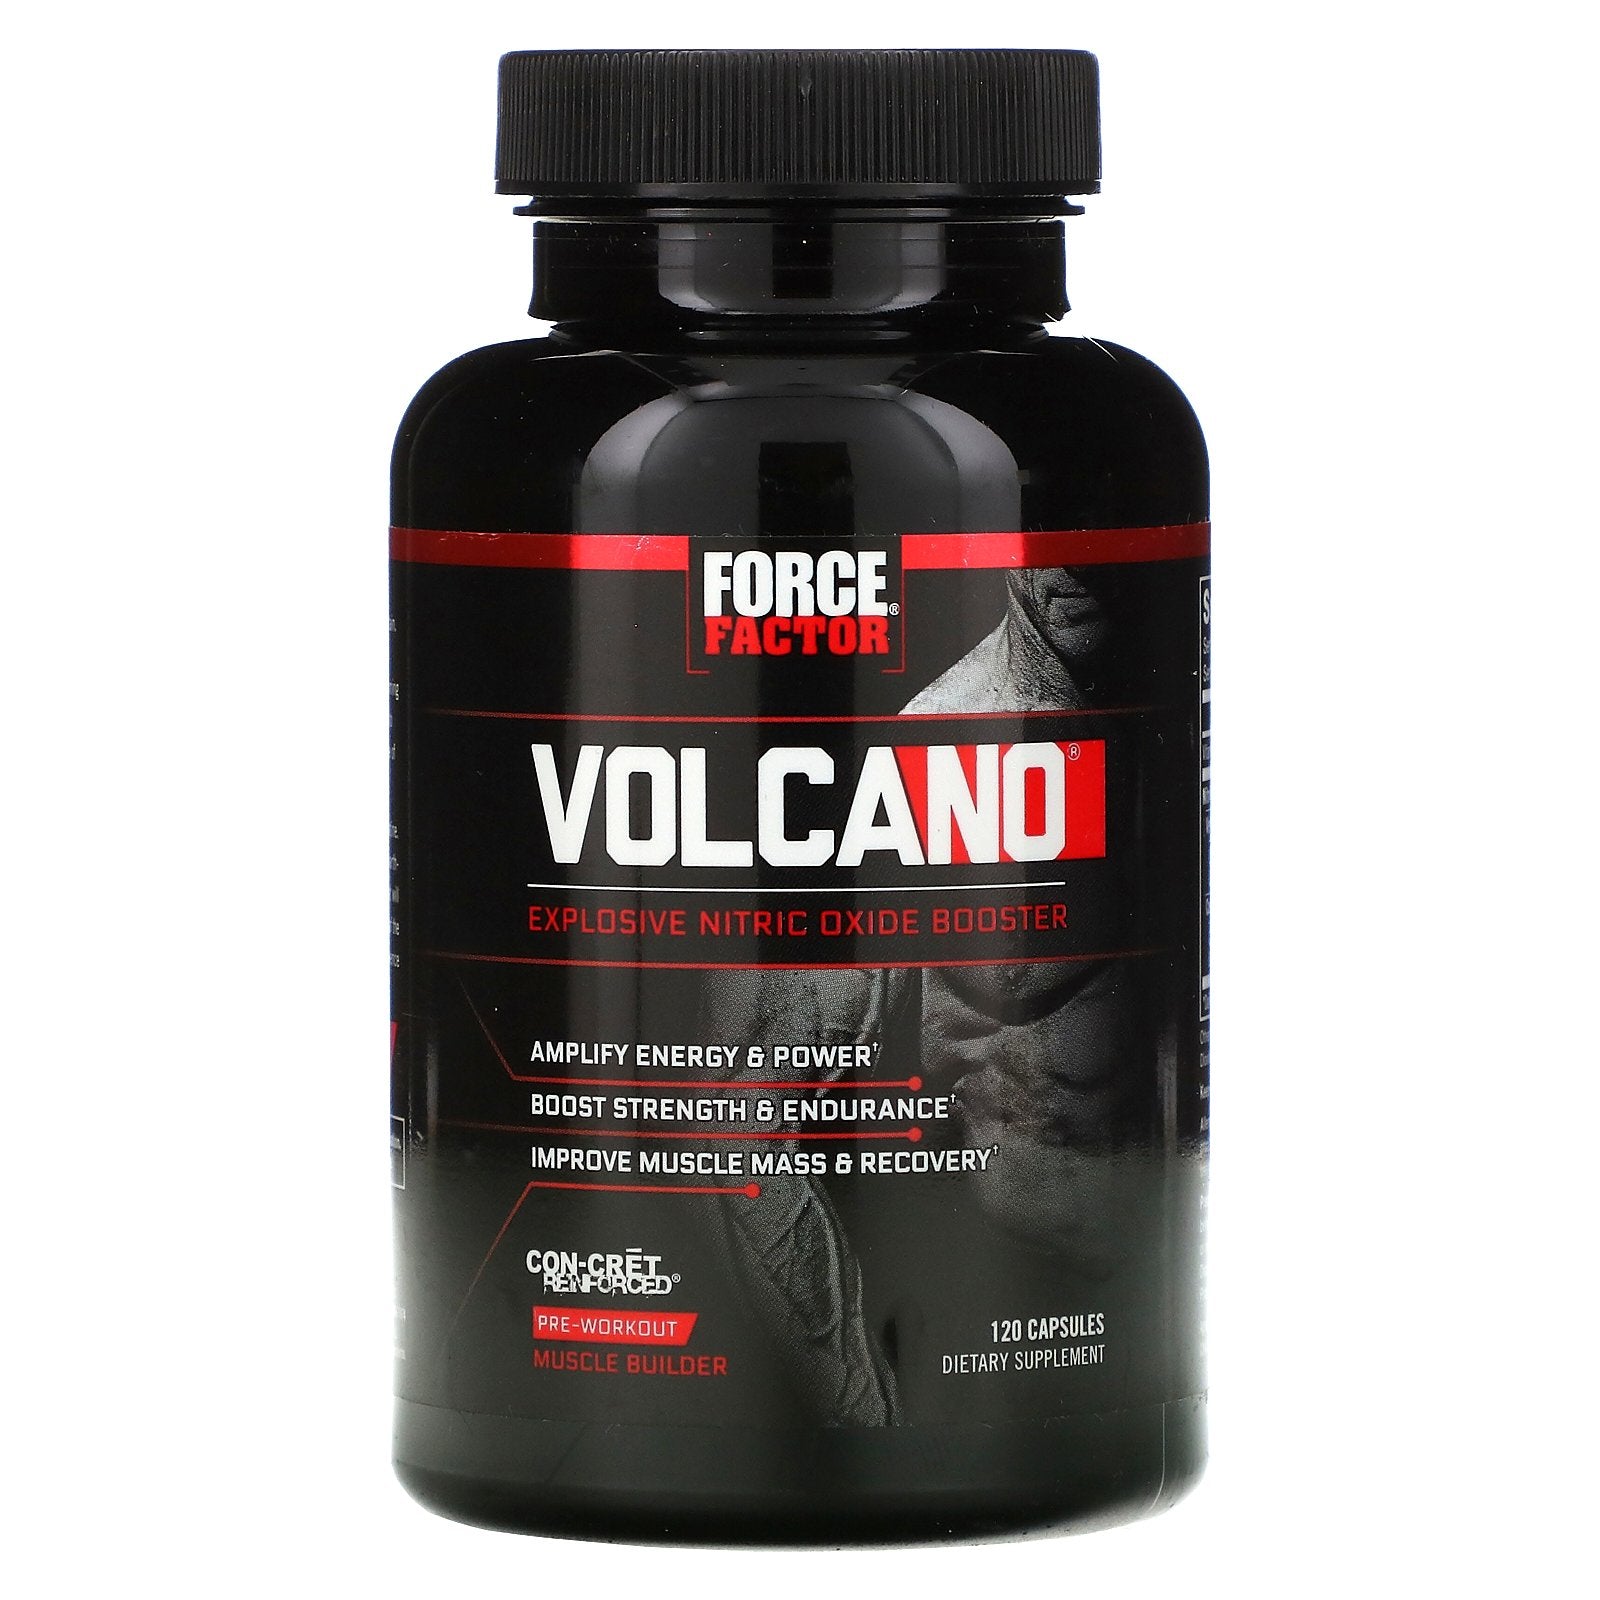 Force Factor, Volcano, Explosive Nitric Oxide Booster, Capsules